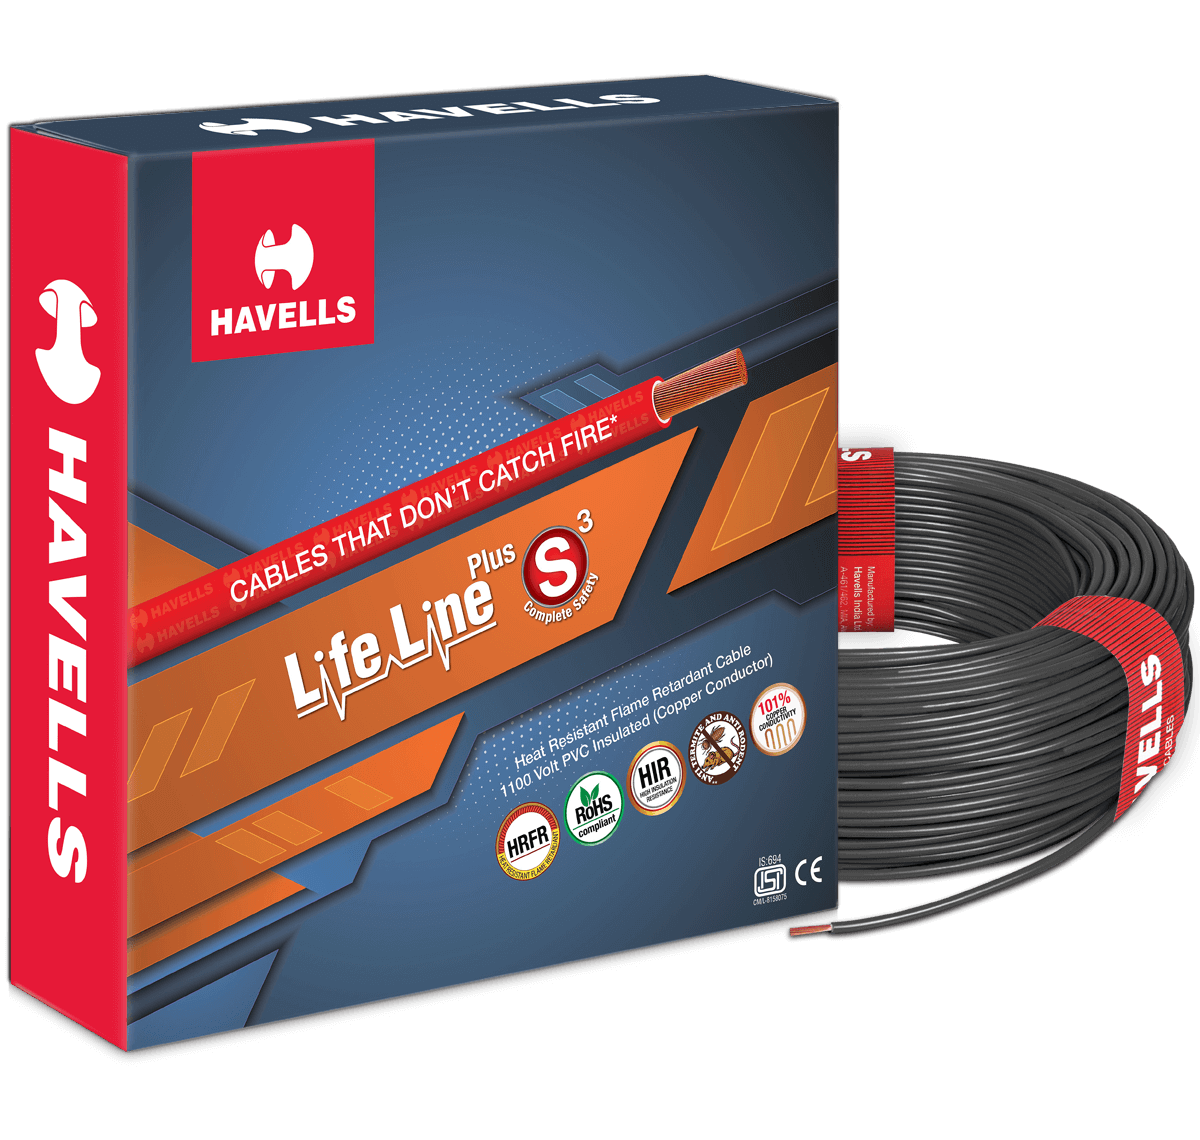 HAVELLS LIFE LINE PLUS S3 HRFR CABLES 1.5MM 90MTR LENGTH COPPER WIRE